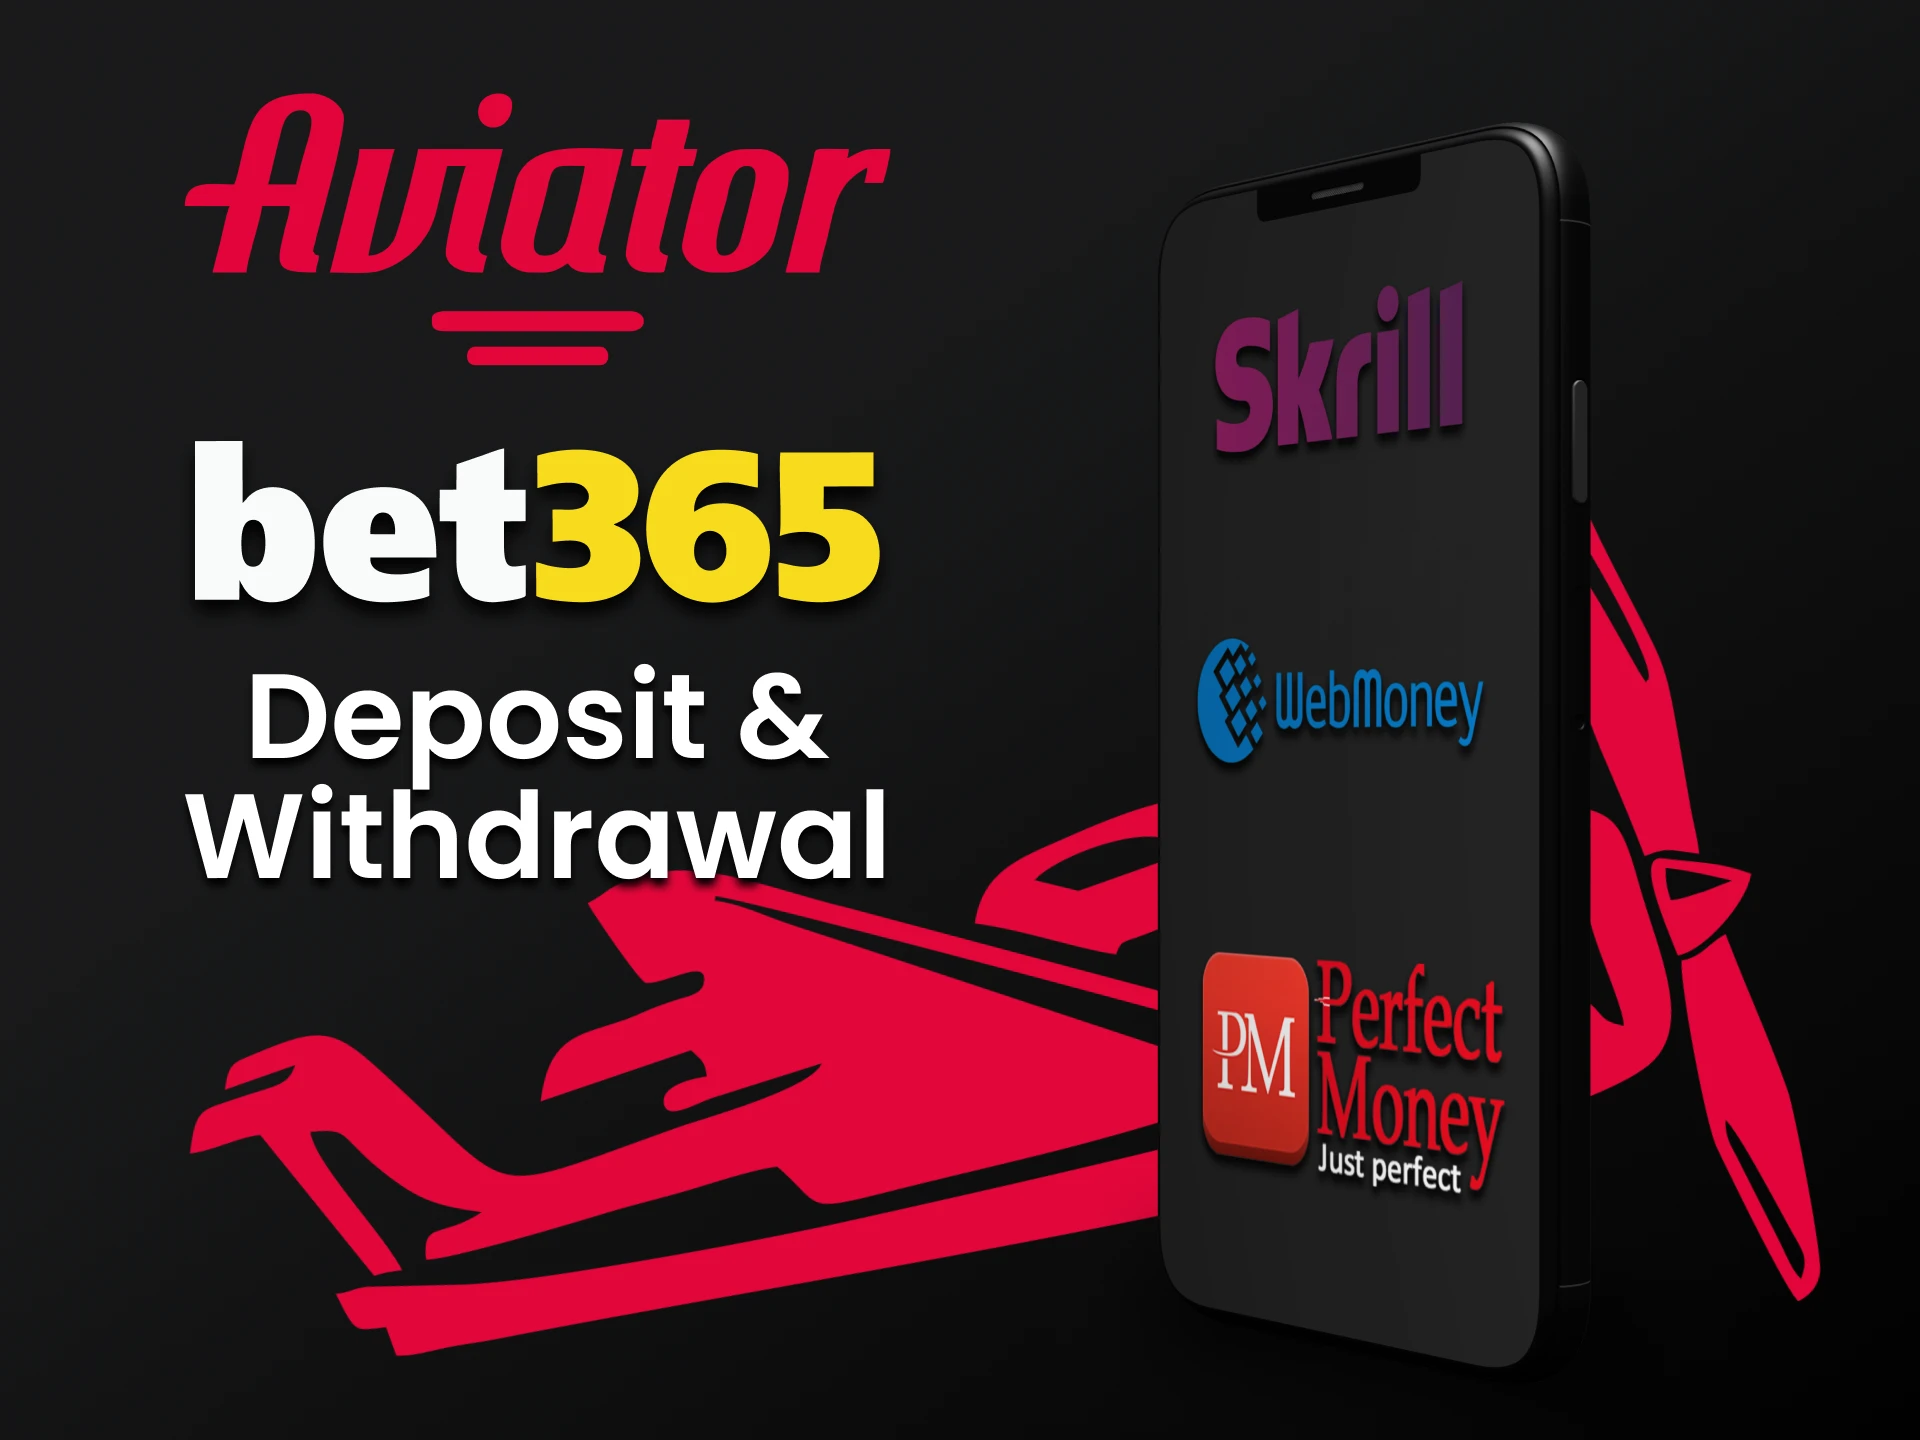 Find out about payment systems in the Bet365 application for Aviator.